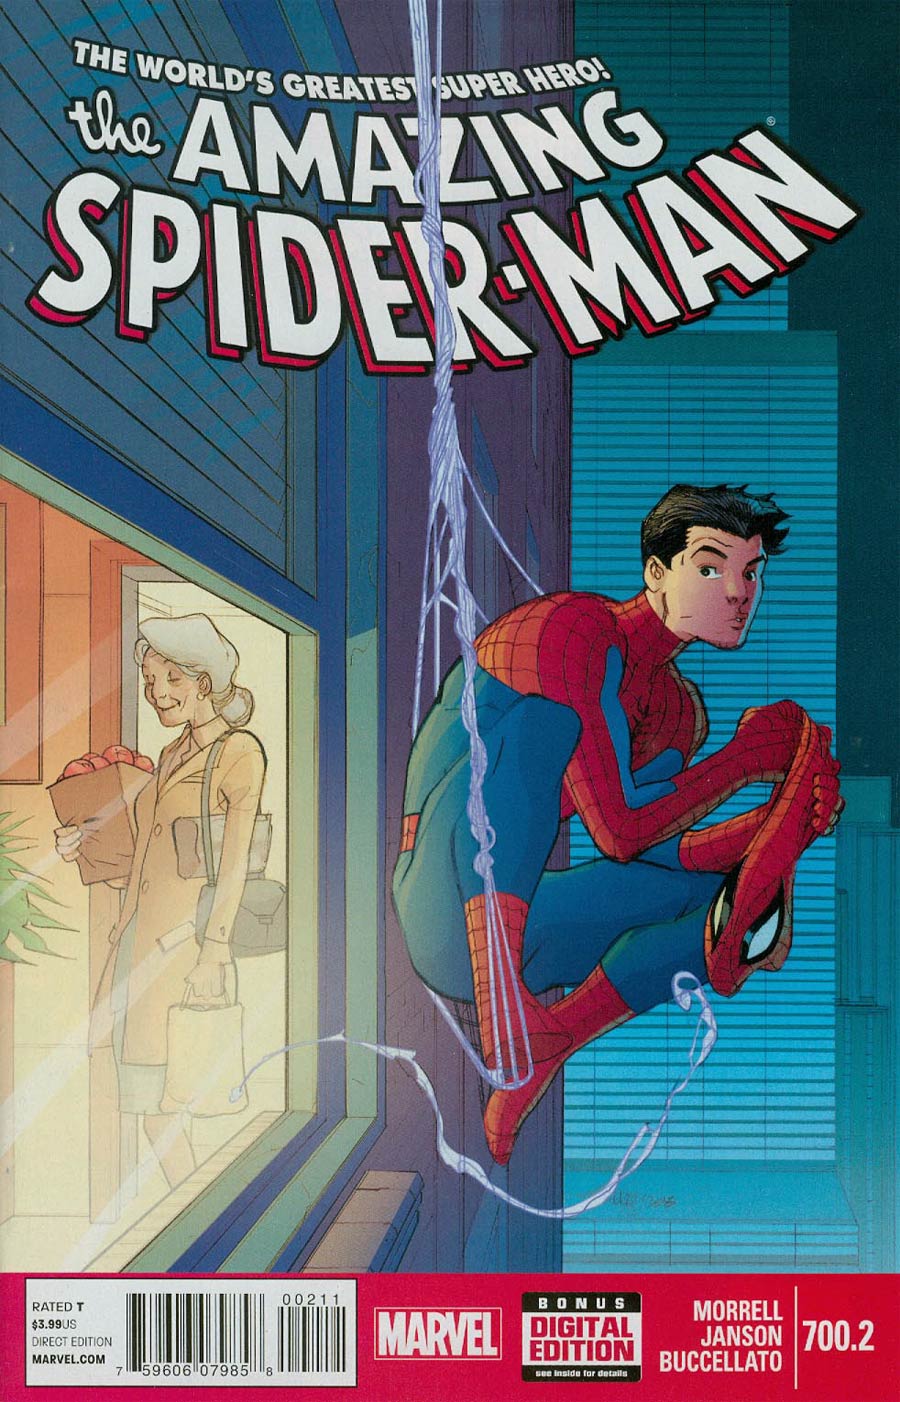 Amazing Spider-Man Vol 2 #700.2 Cover A Regular Pasqual Ferry Cover